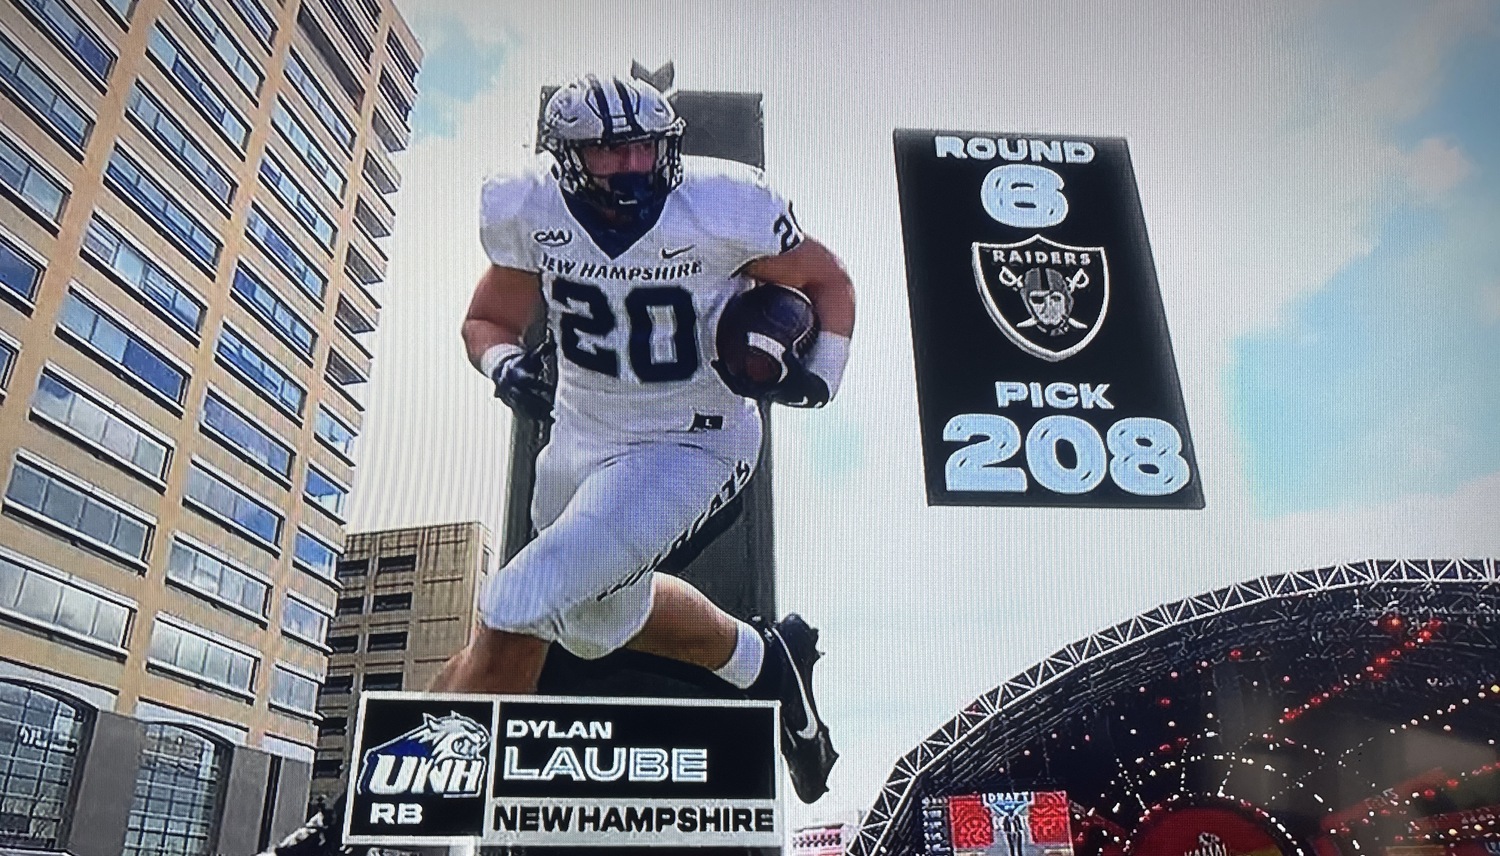 Dylan Laube as featured by ESPN when he was drafted in the sixth round by the Las Vegas Raiders on Saturday.